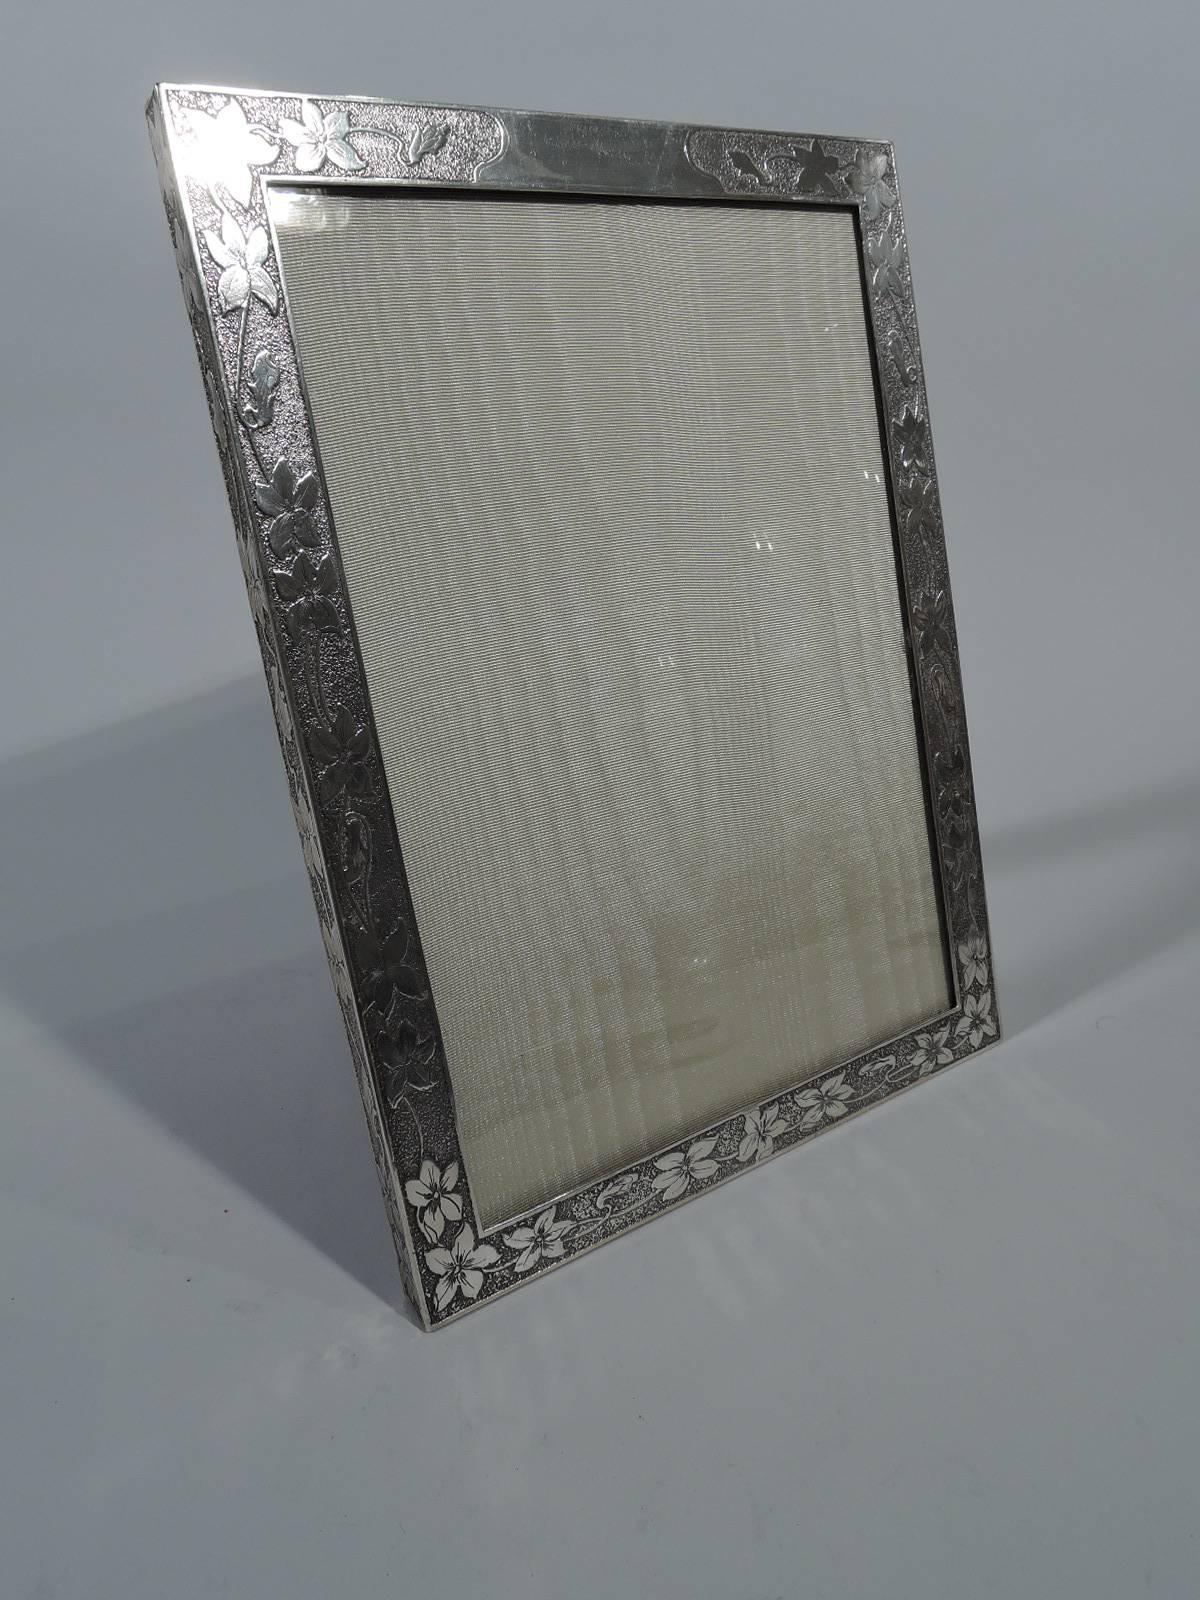 Art Nouveau sterling silver frame. Made by Tiffany & Co. in New York. Rectangular window bordered by acid-etched and engraved flowers (possibly morning glories) on stippled ground. Same on sides and top edge. Shaped cartouche (vacant). For portrait